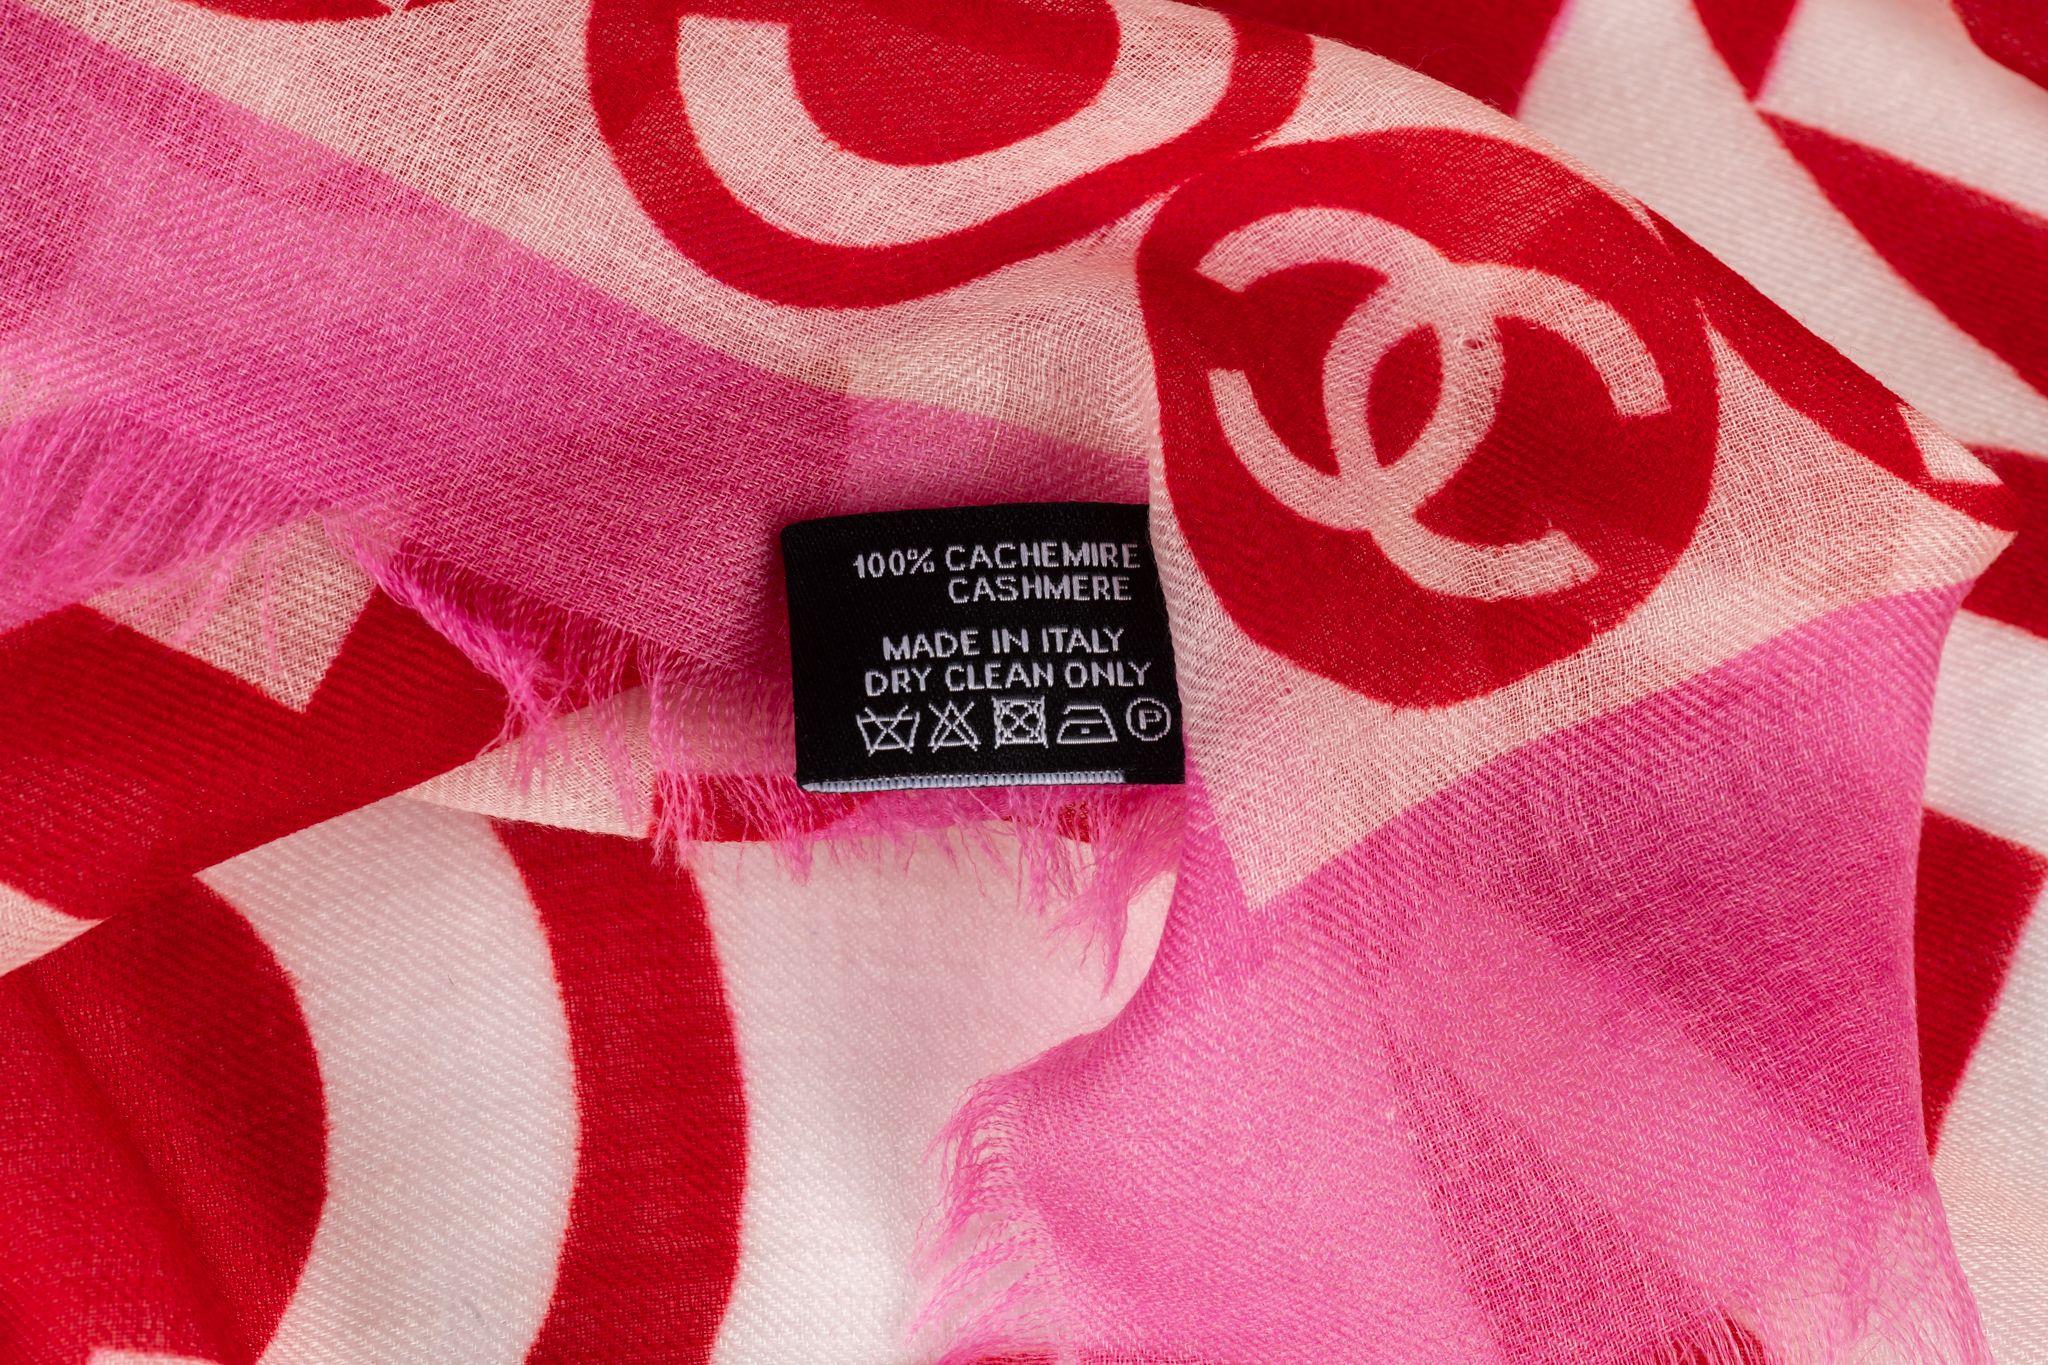 Chanel new writing logo cashmere shawl in white, red and fuchsia . Original care tag.